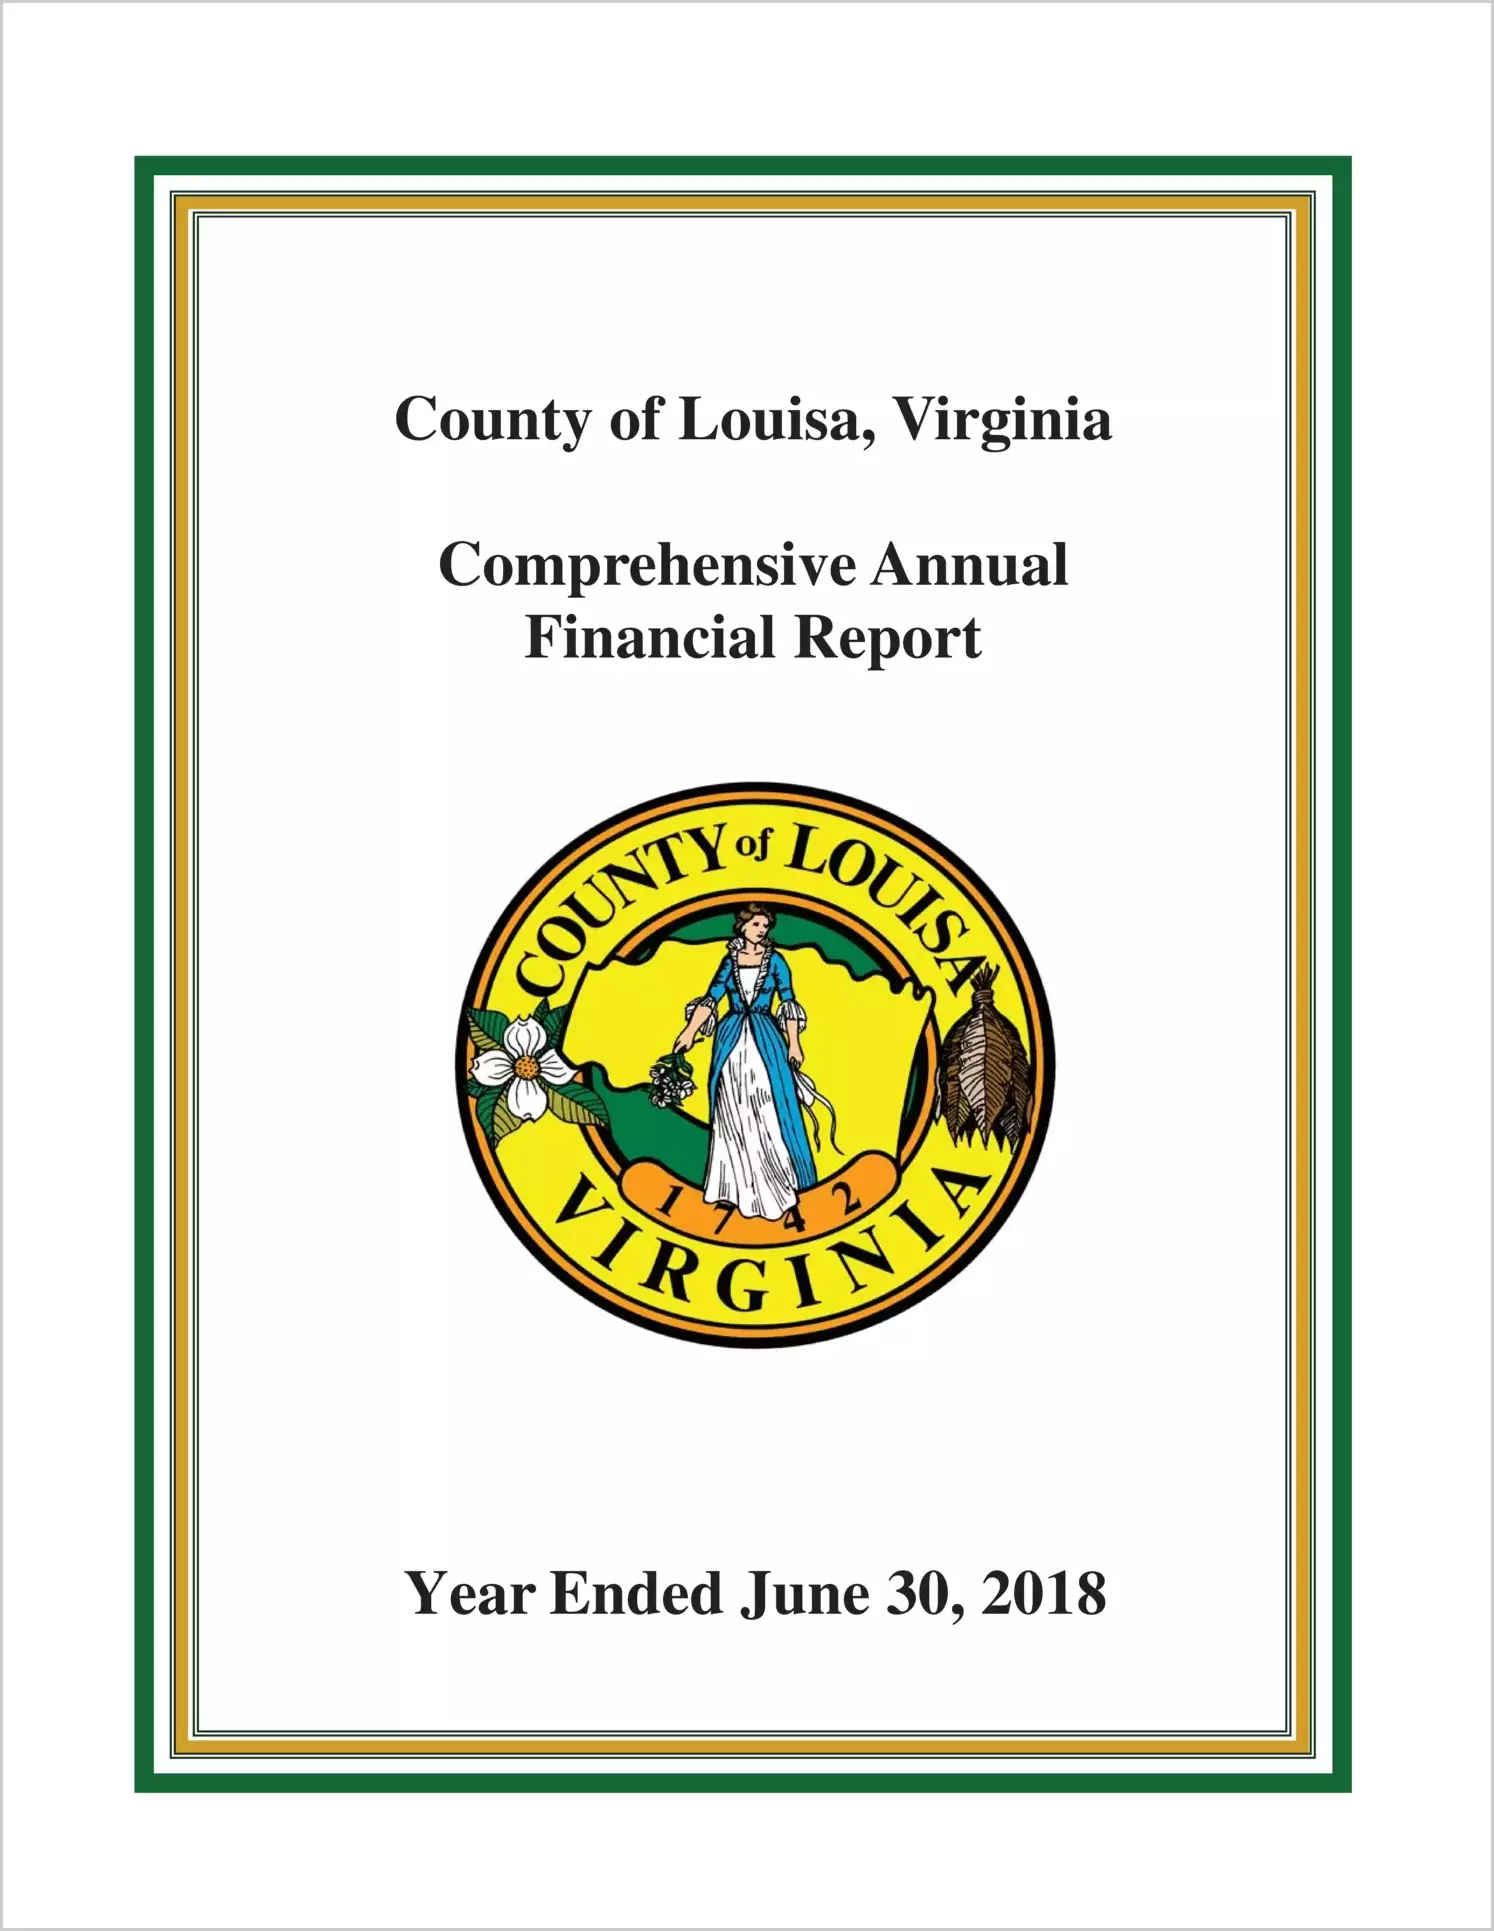 2018 Annual Financial Report for County of Louisa